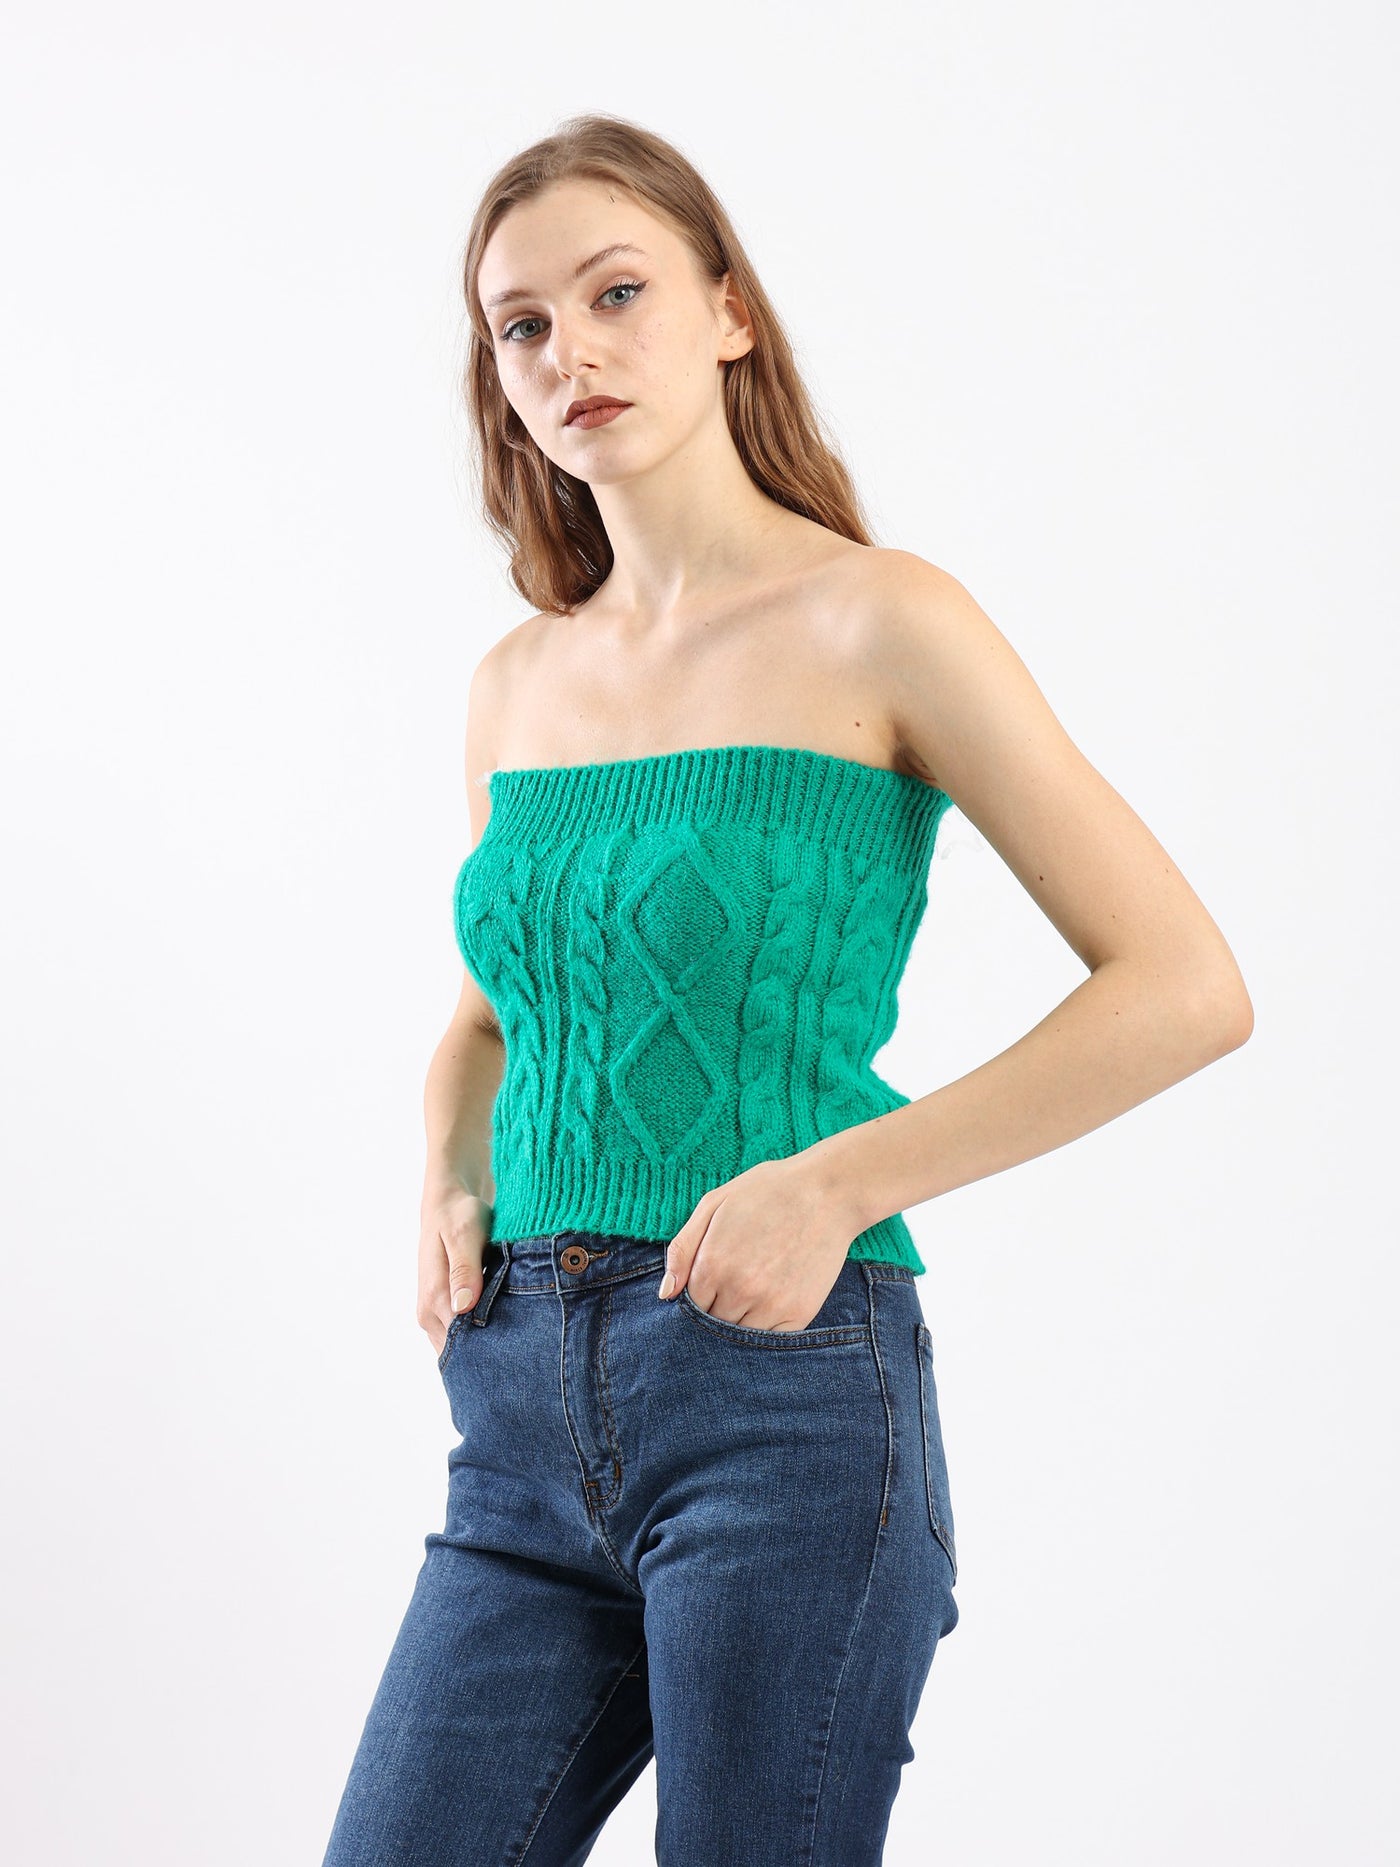 Top - Cropped Design - Strapless